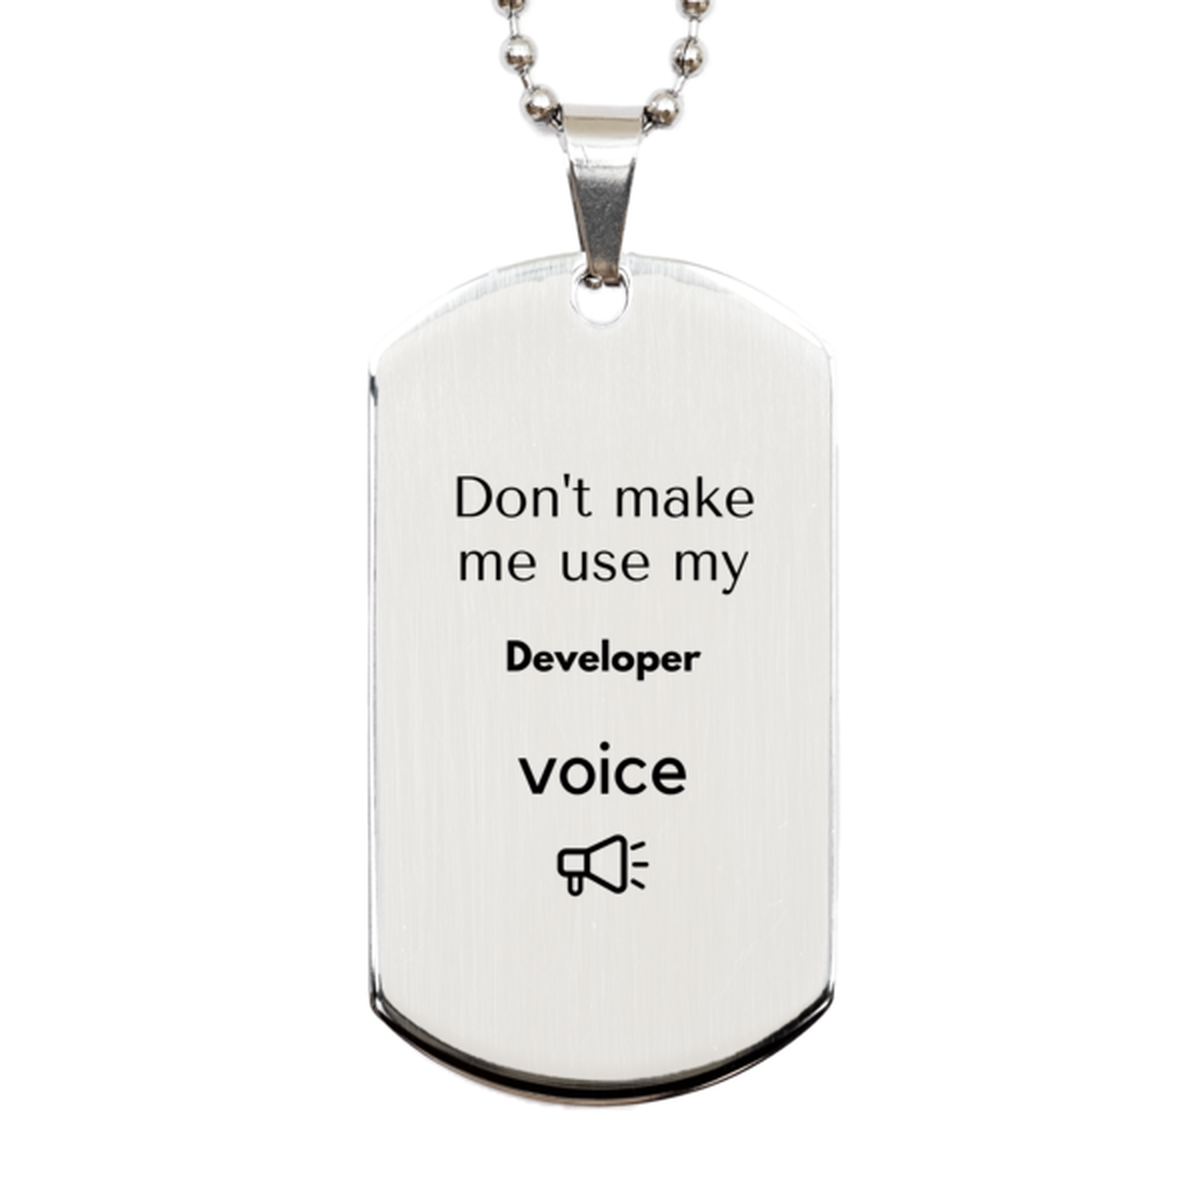 Don't make me use my Developer voice, Sarcasm Developer Gifts, Christmas Developer Silver Dog Tag Birthday Unique Gifts For Developer Coworkers, Men, Women, Colleague, Friends